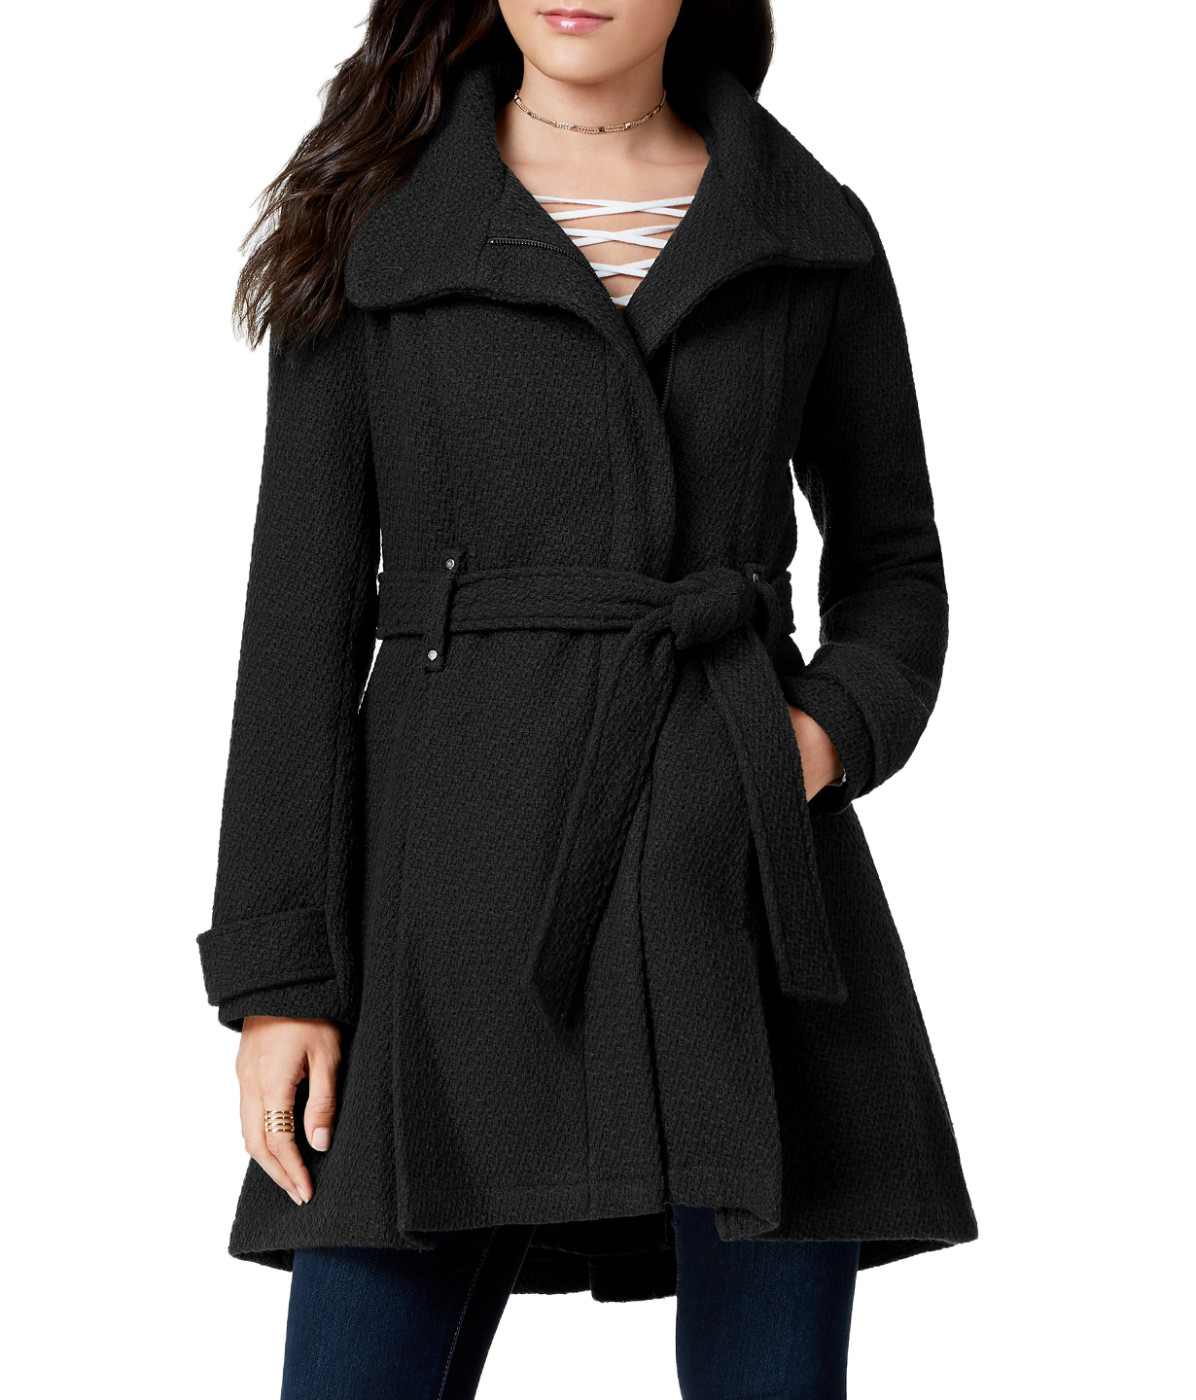 woocommerce-673321-2209615.cloudwaysapps.com-madden-girl-womens-black-wool-blend-textured-belted-wrap-coat